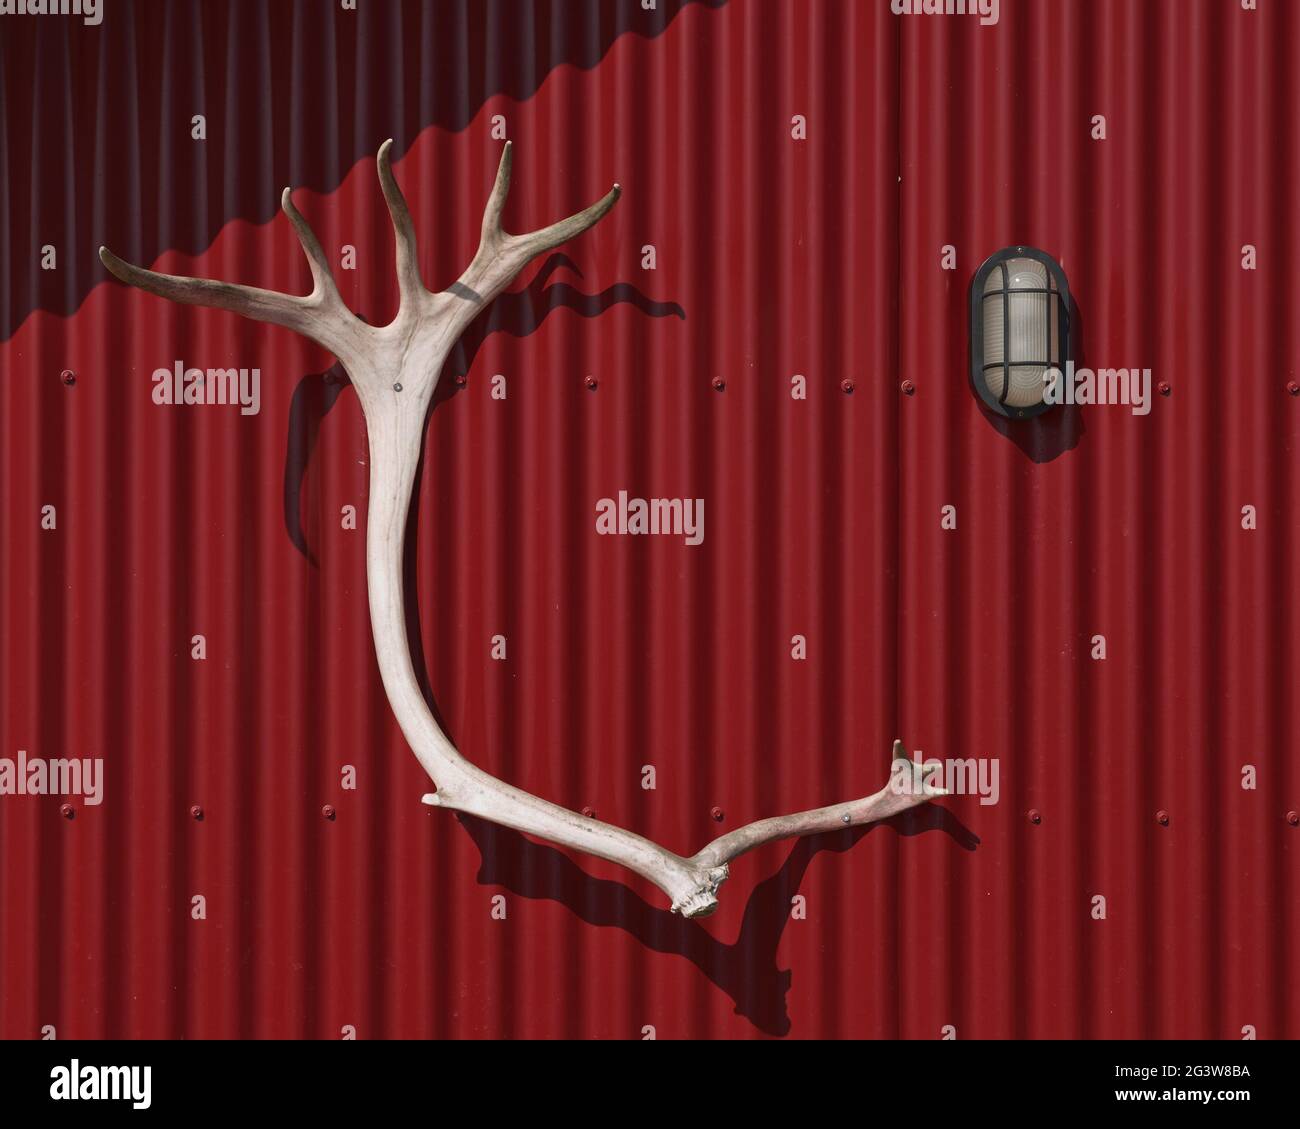 Antlers as a hunting trophy hanged on a red cabin wall Stock Photo